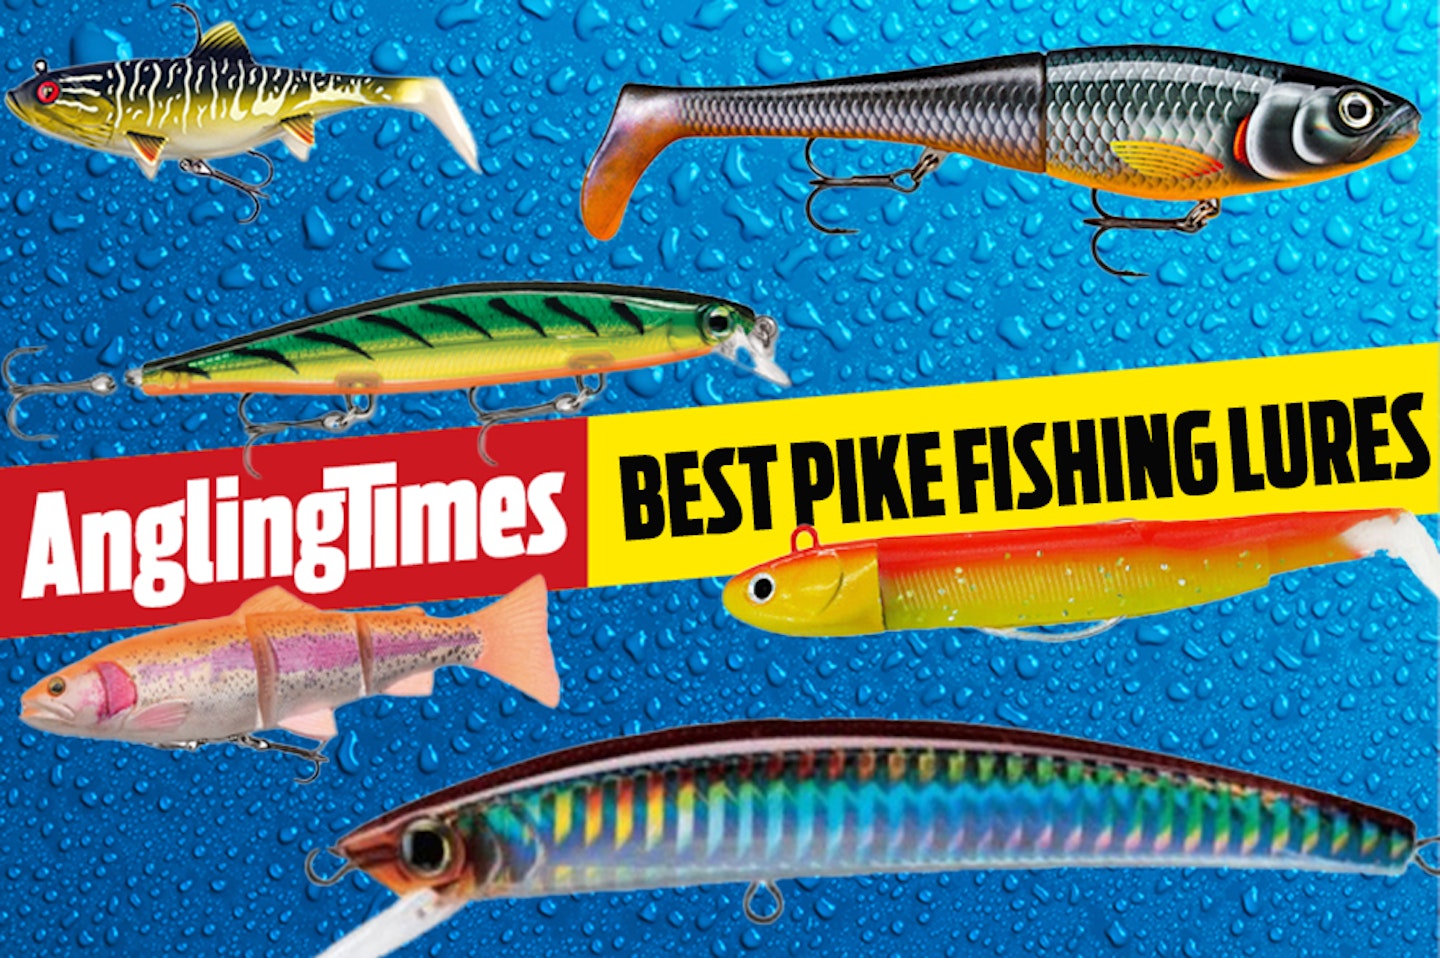 Best lures for pike fishing